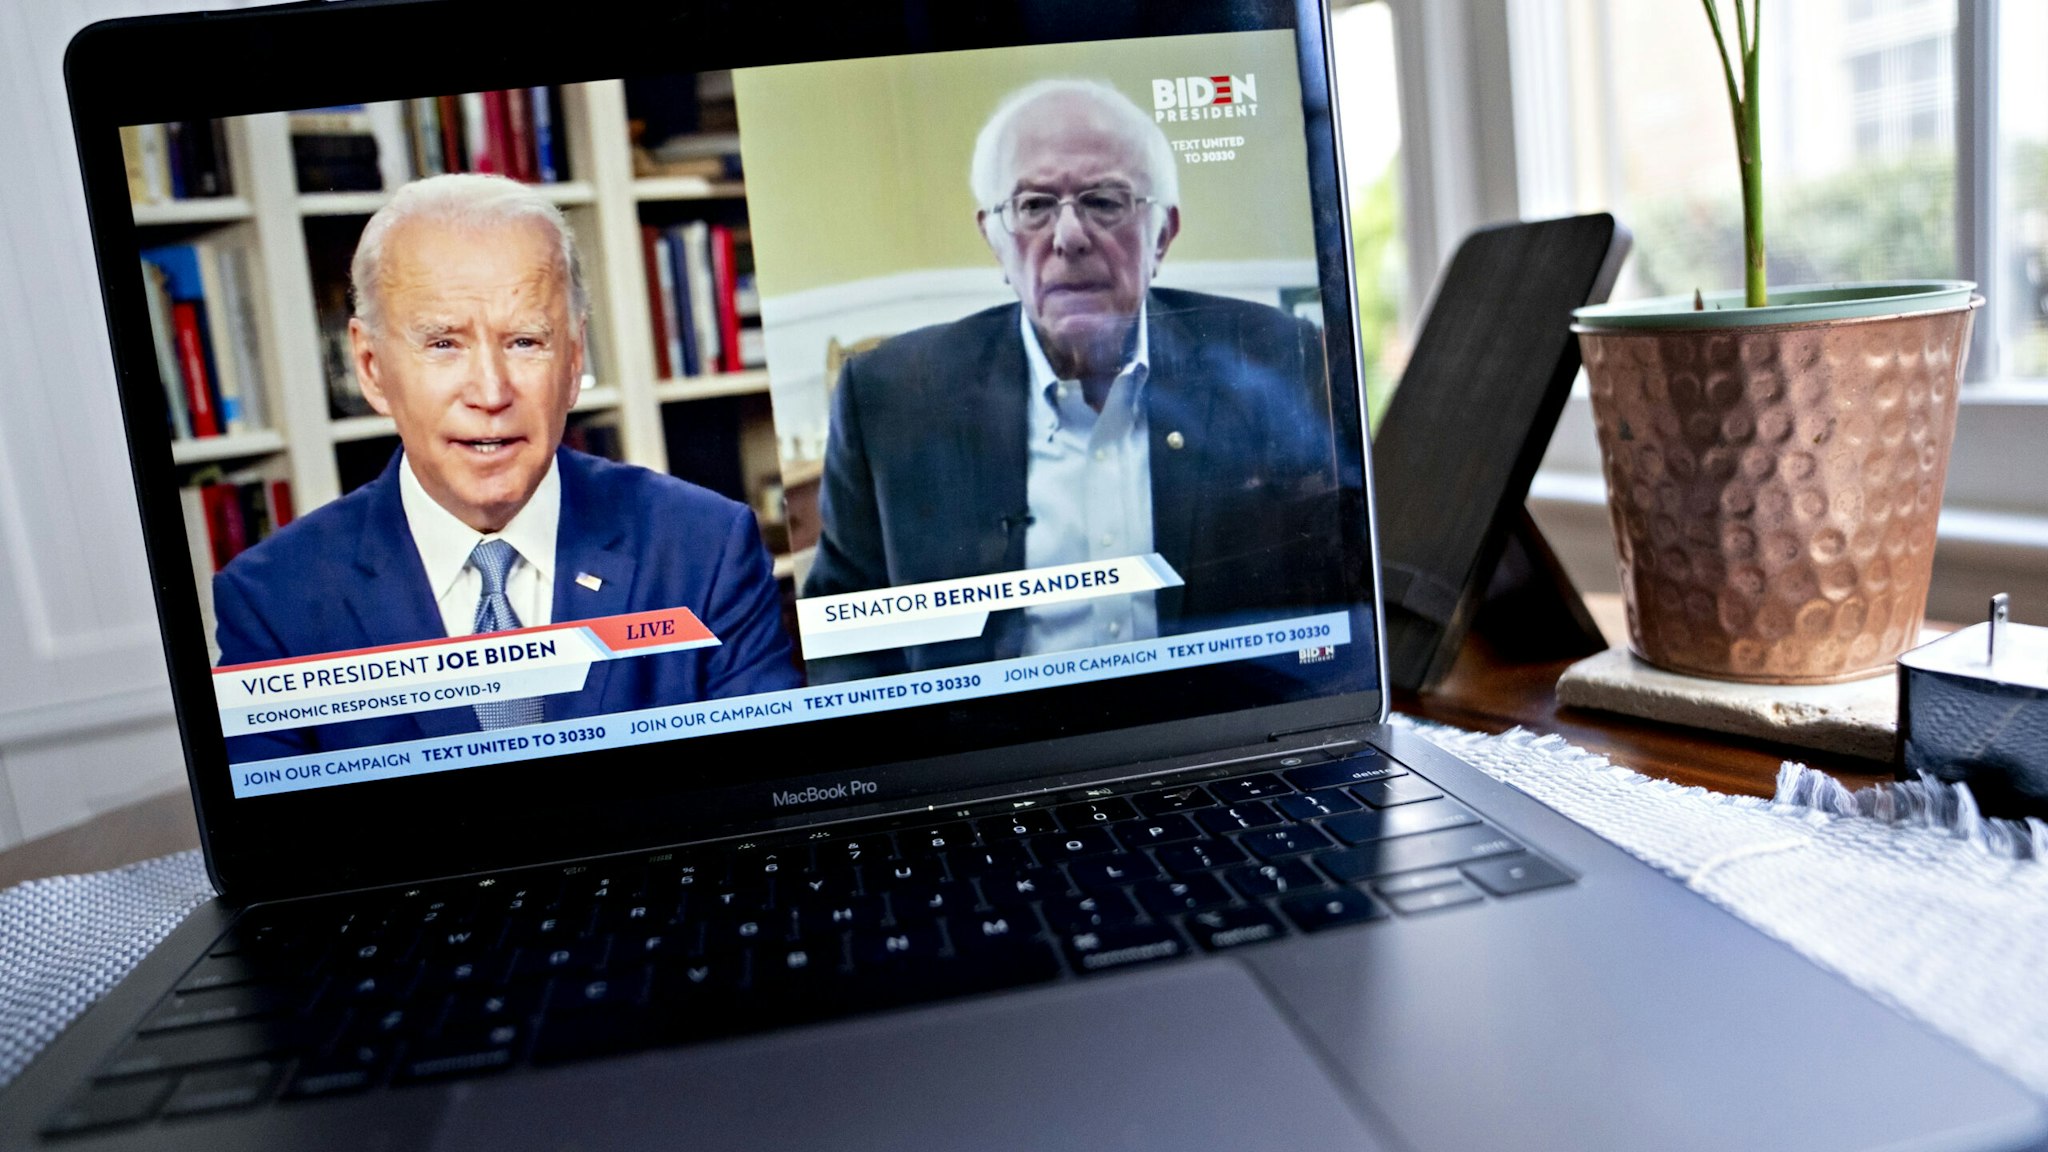 Former Vice President Joe Biden, presumptive Democratic presidential nominee, left, speaks as Senator Bernie Sanders, an Independent from Vermont, right, listens during a virtual event seen on an Apple Inc. laptop computer in Arlington, Virginia, U.S., on Monday, April 13, 2020. Sanders endorsed Biden during the joint livestream saying that Americans of all political affiliations should back the former vice president. Photographer: Andrew Harrer/Bloomberg via Getty Images